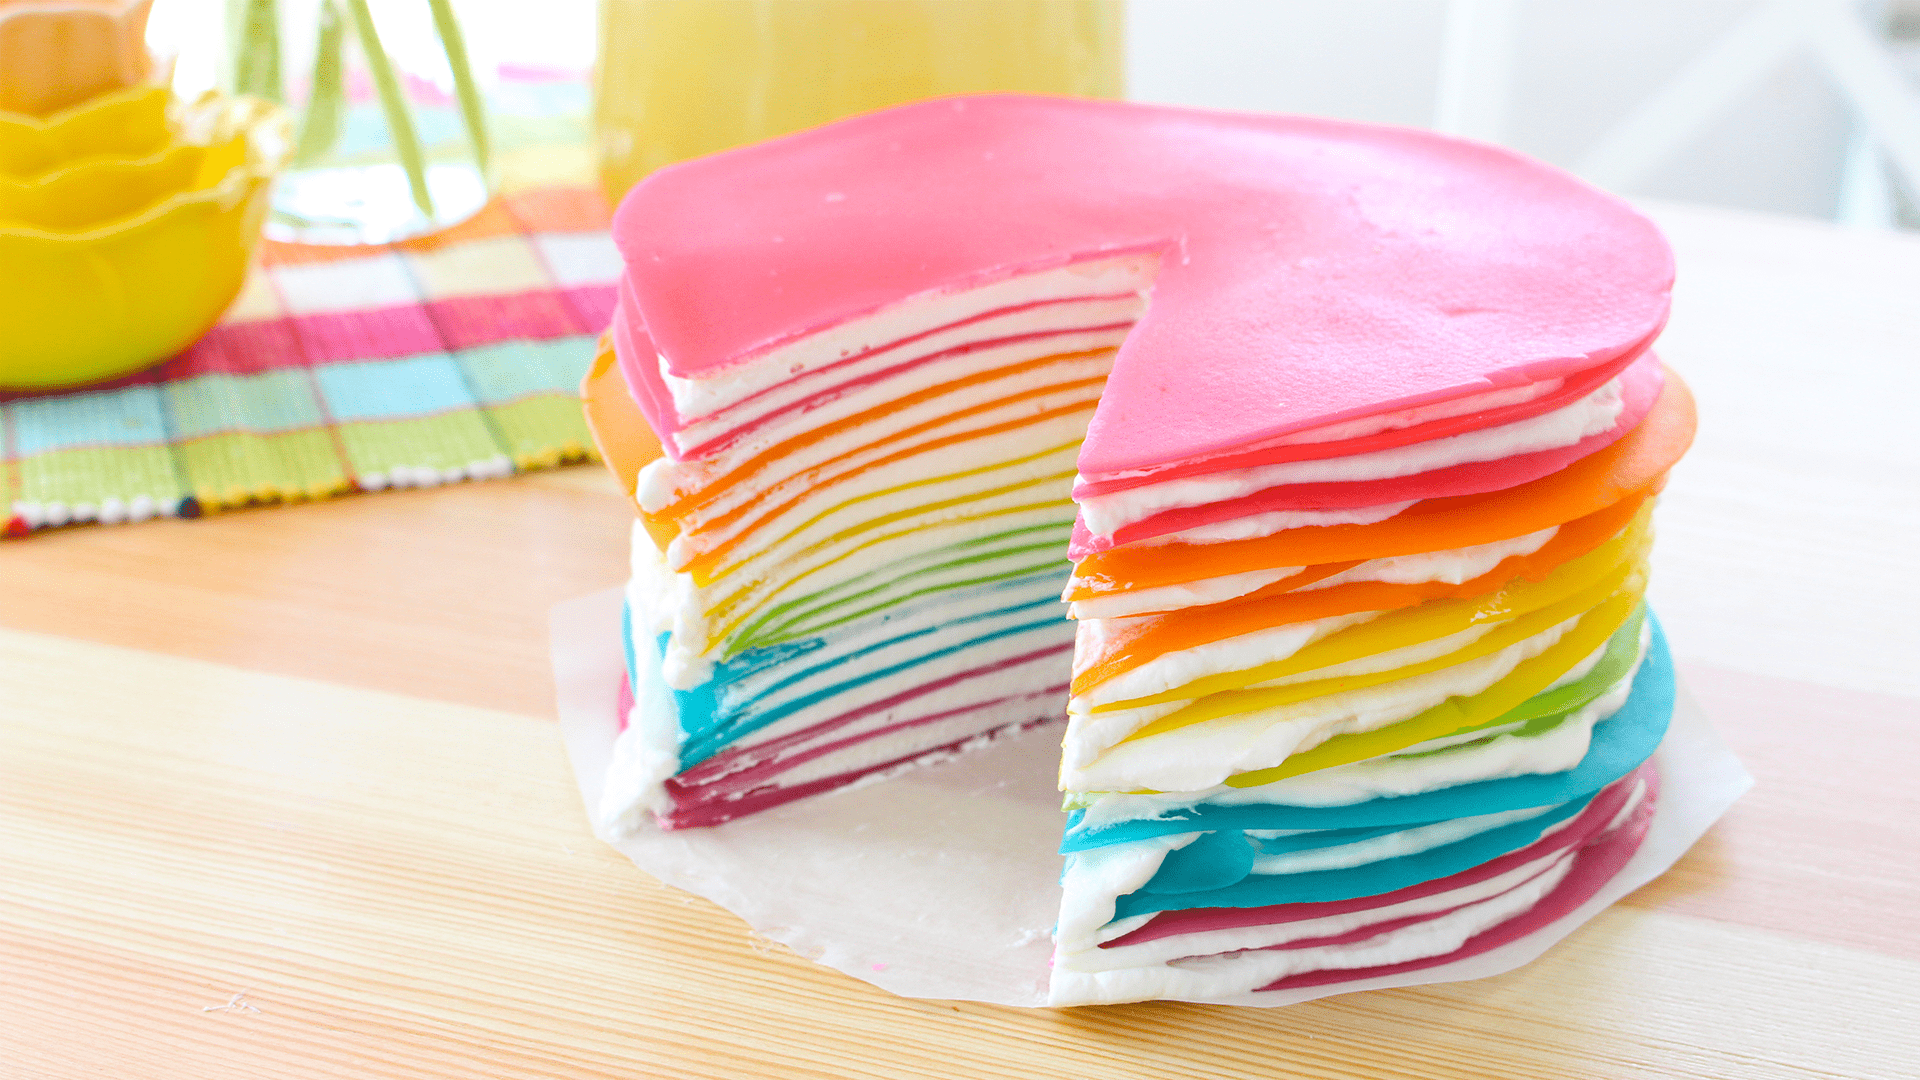 Vegan Crepe Cake with Coconut-Plantain Layer - My Eating Space